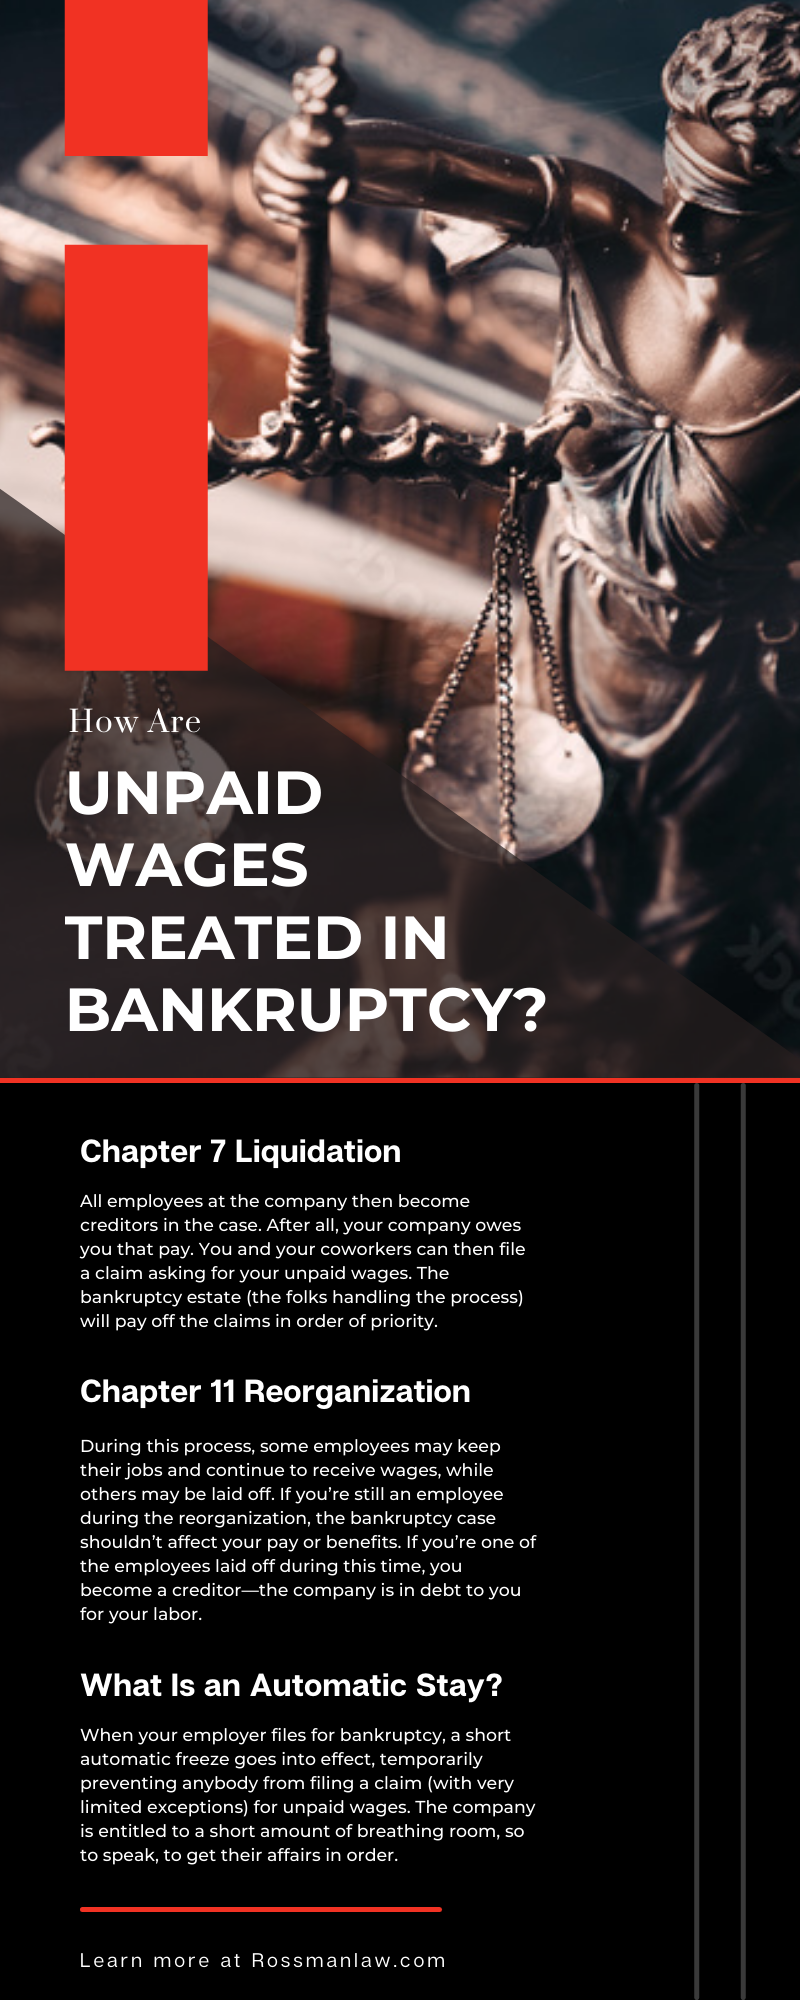 How Are Unpaid Wages Treated in Bankruptcy?